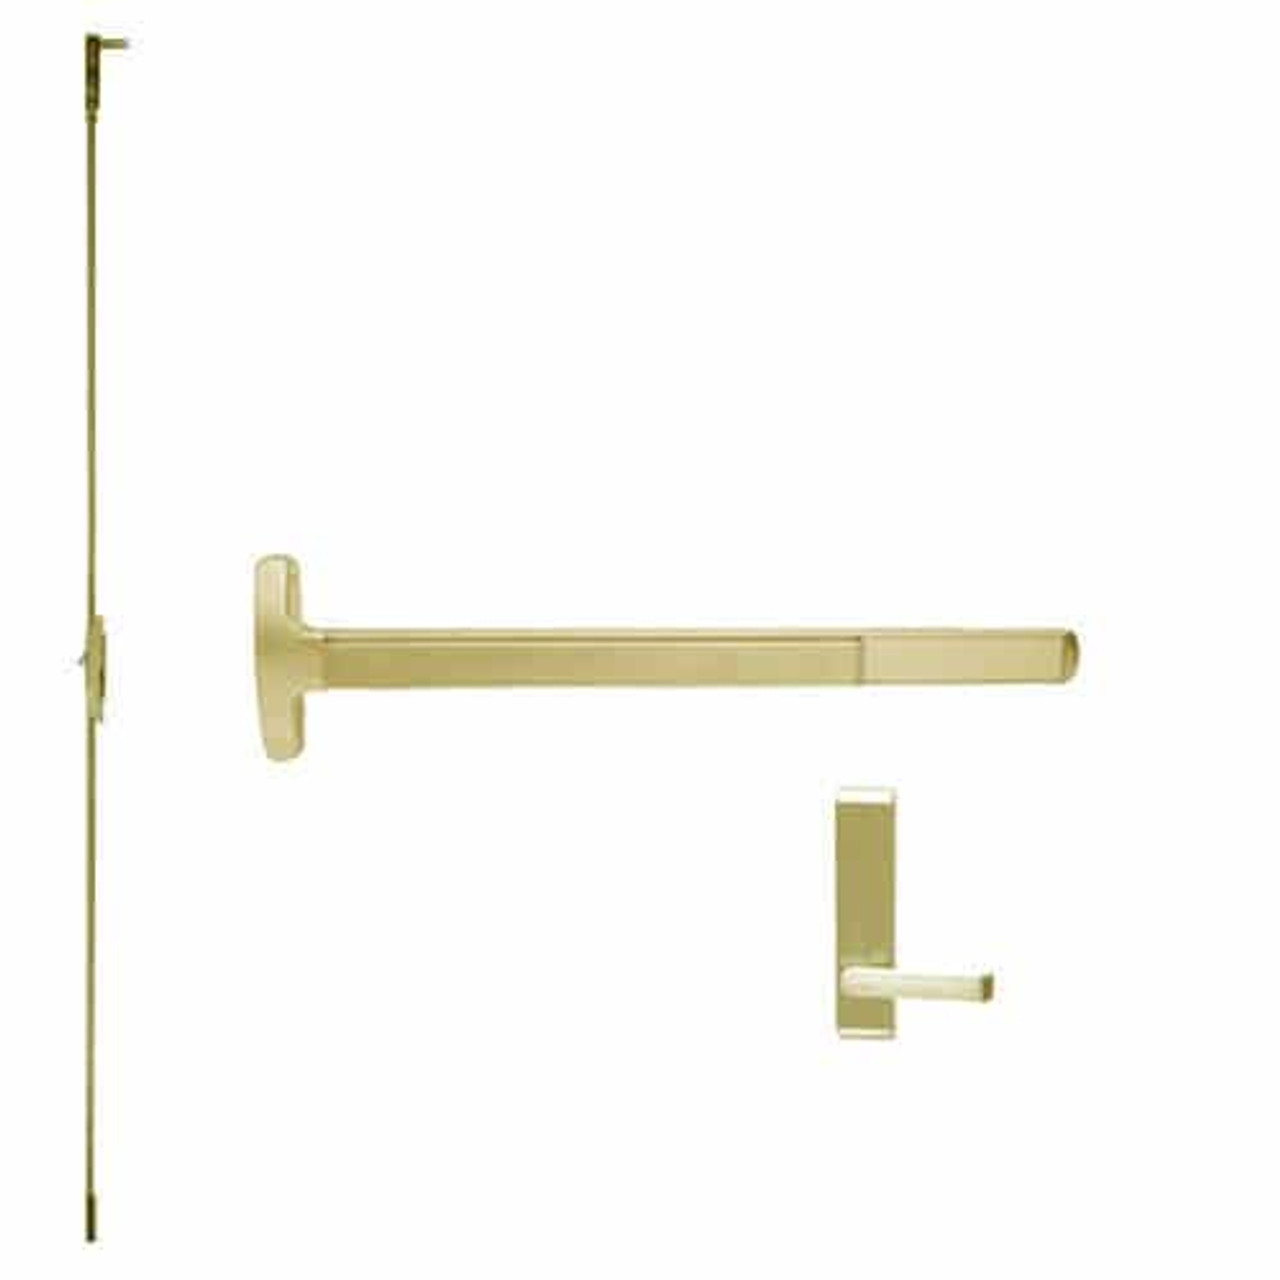 F-24-C-L-BE-DANE-US4-3-LHR Falcon Exit Device in Satin Brass